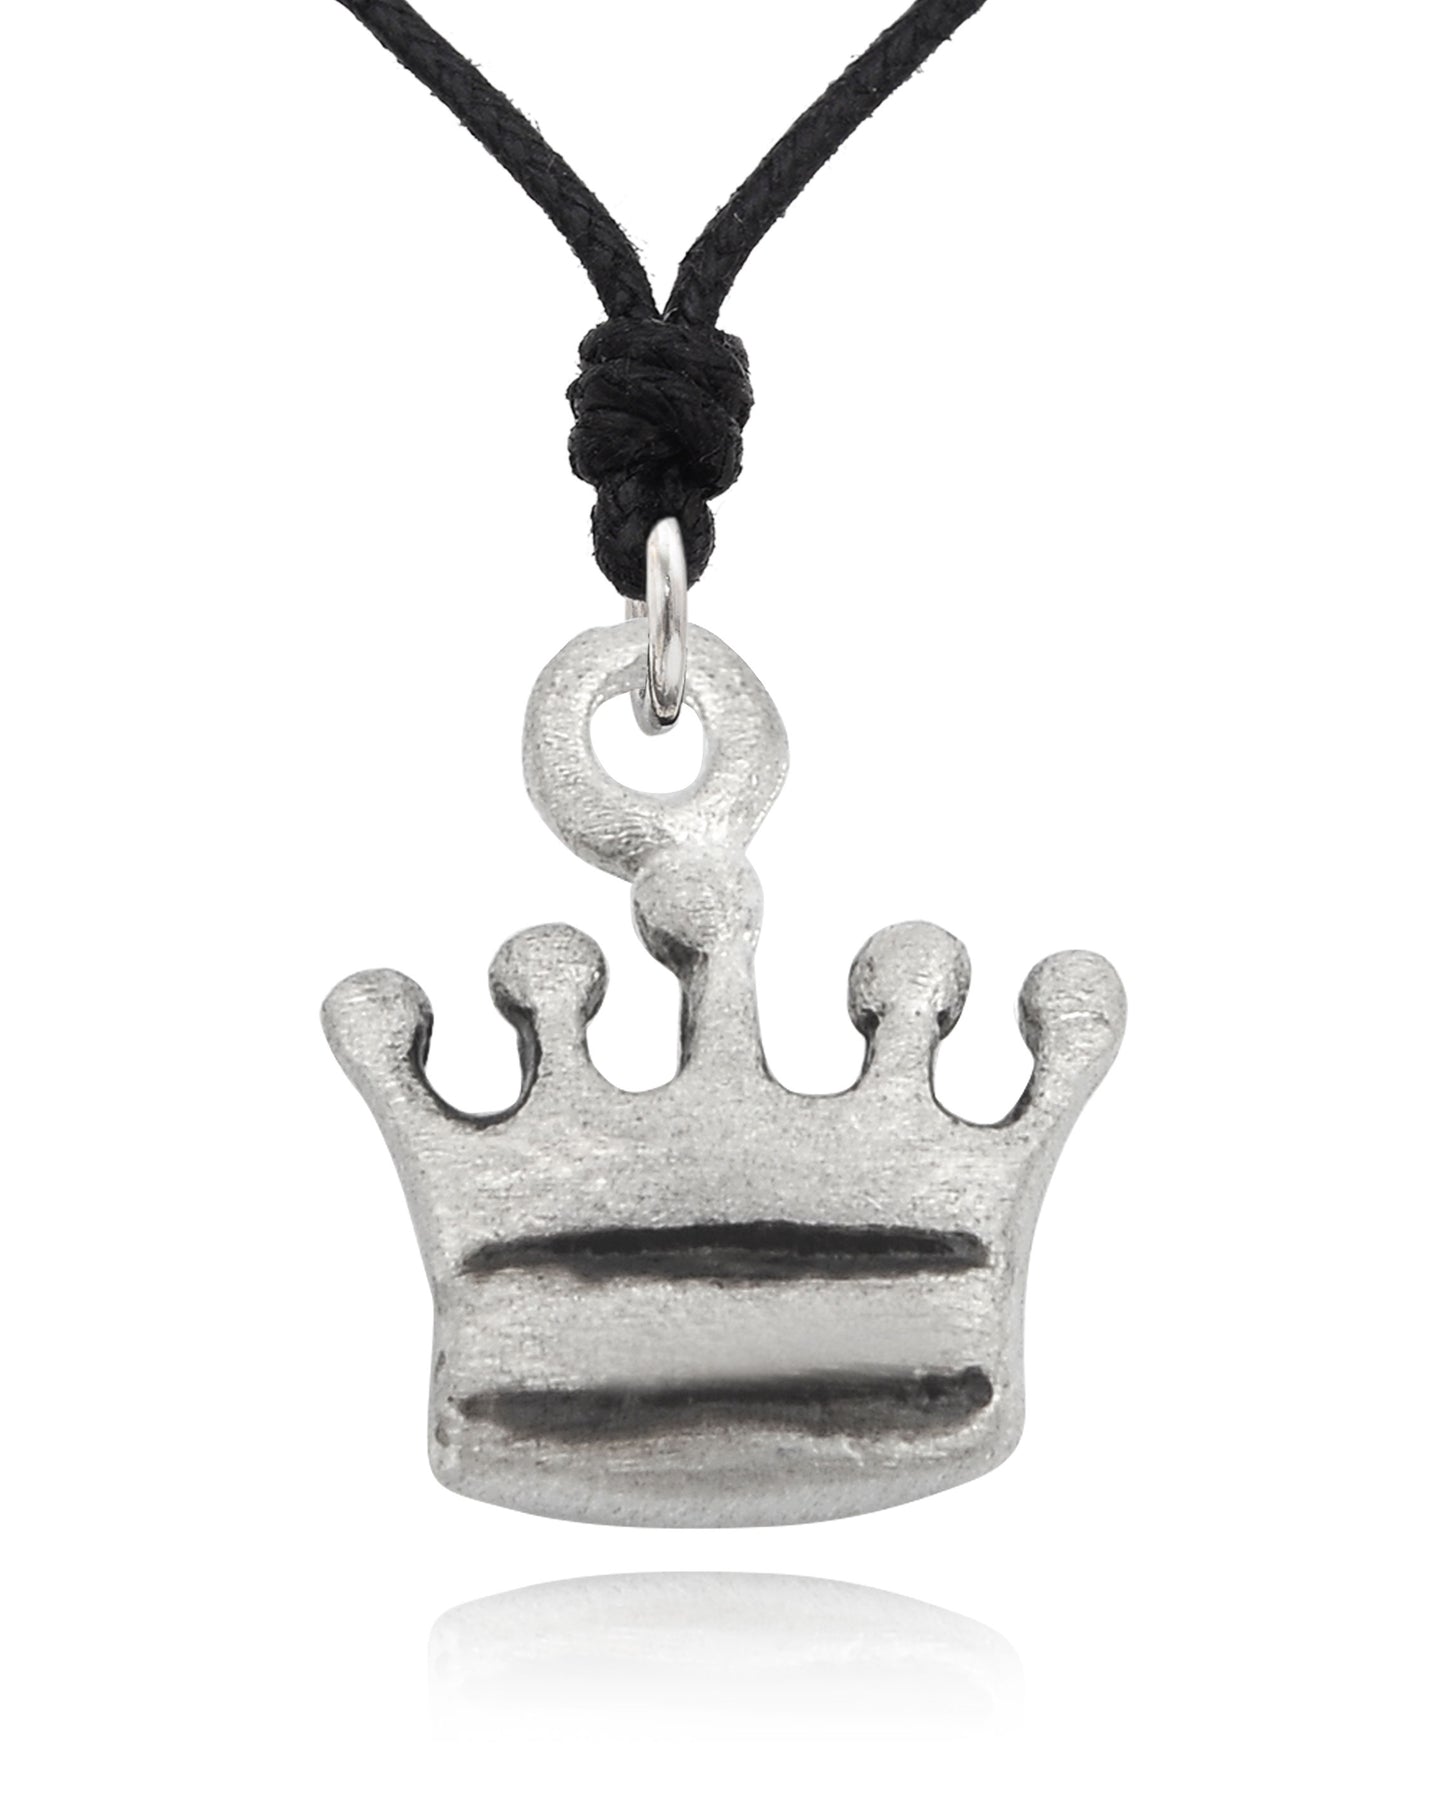 King Crown Silver Pewter Charm Necklace Pendant Jewelry With Cotton Cord